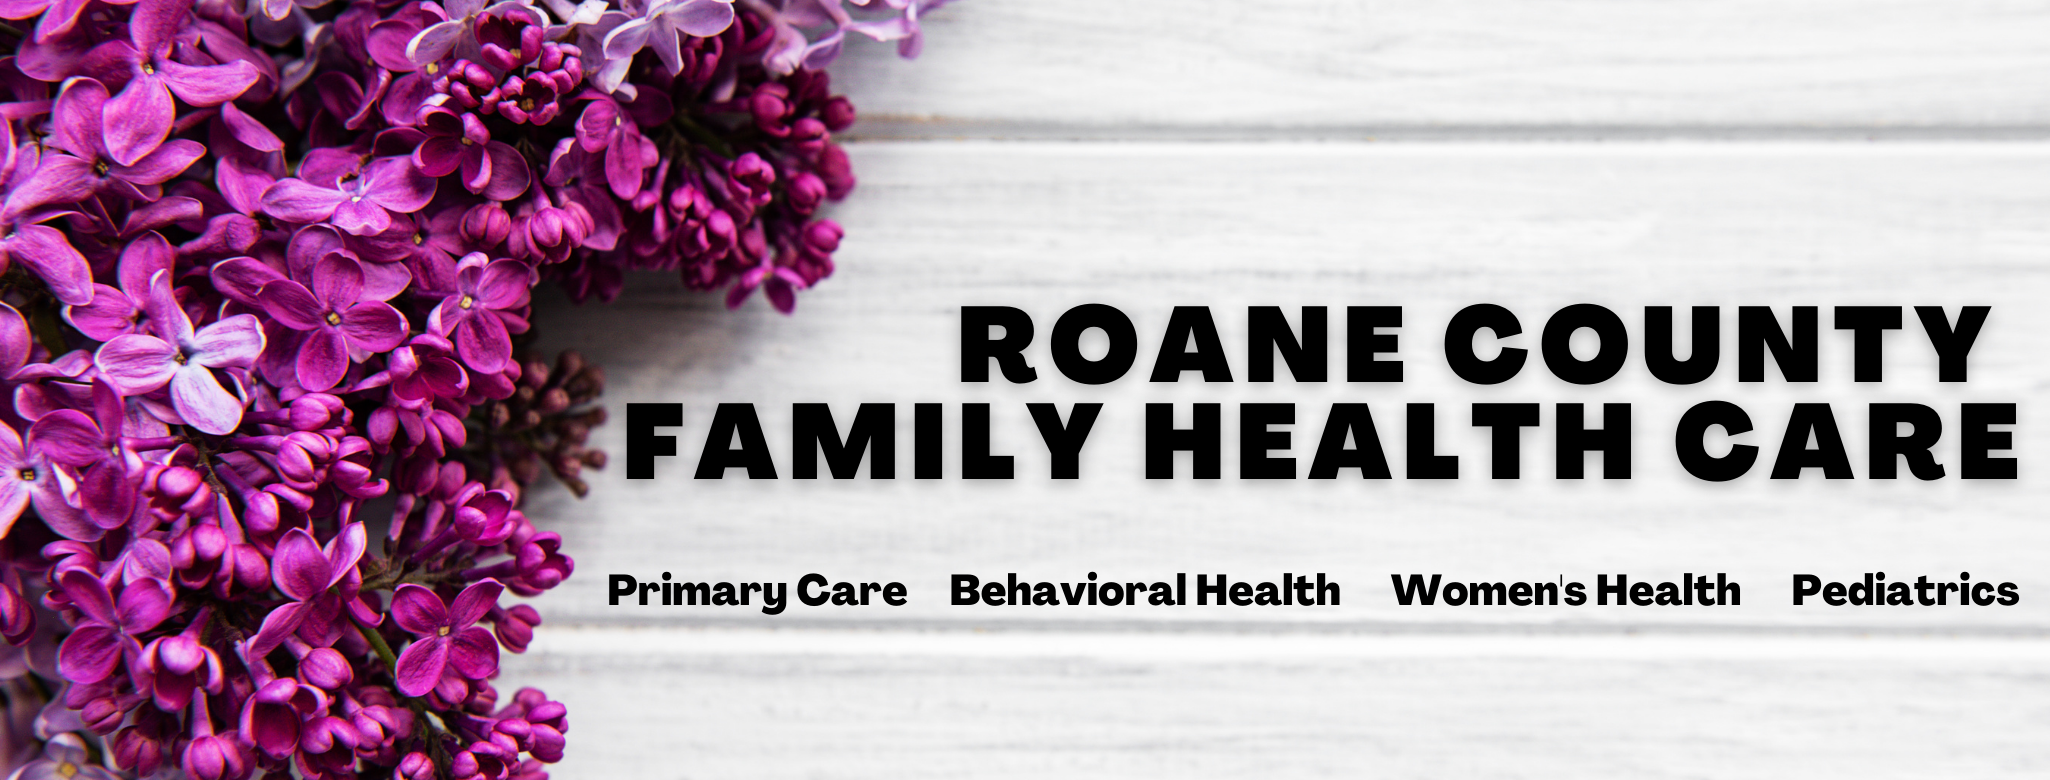 Roane County Family Health Care